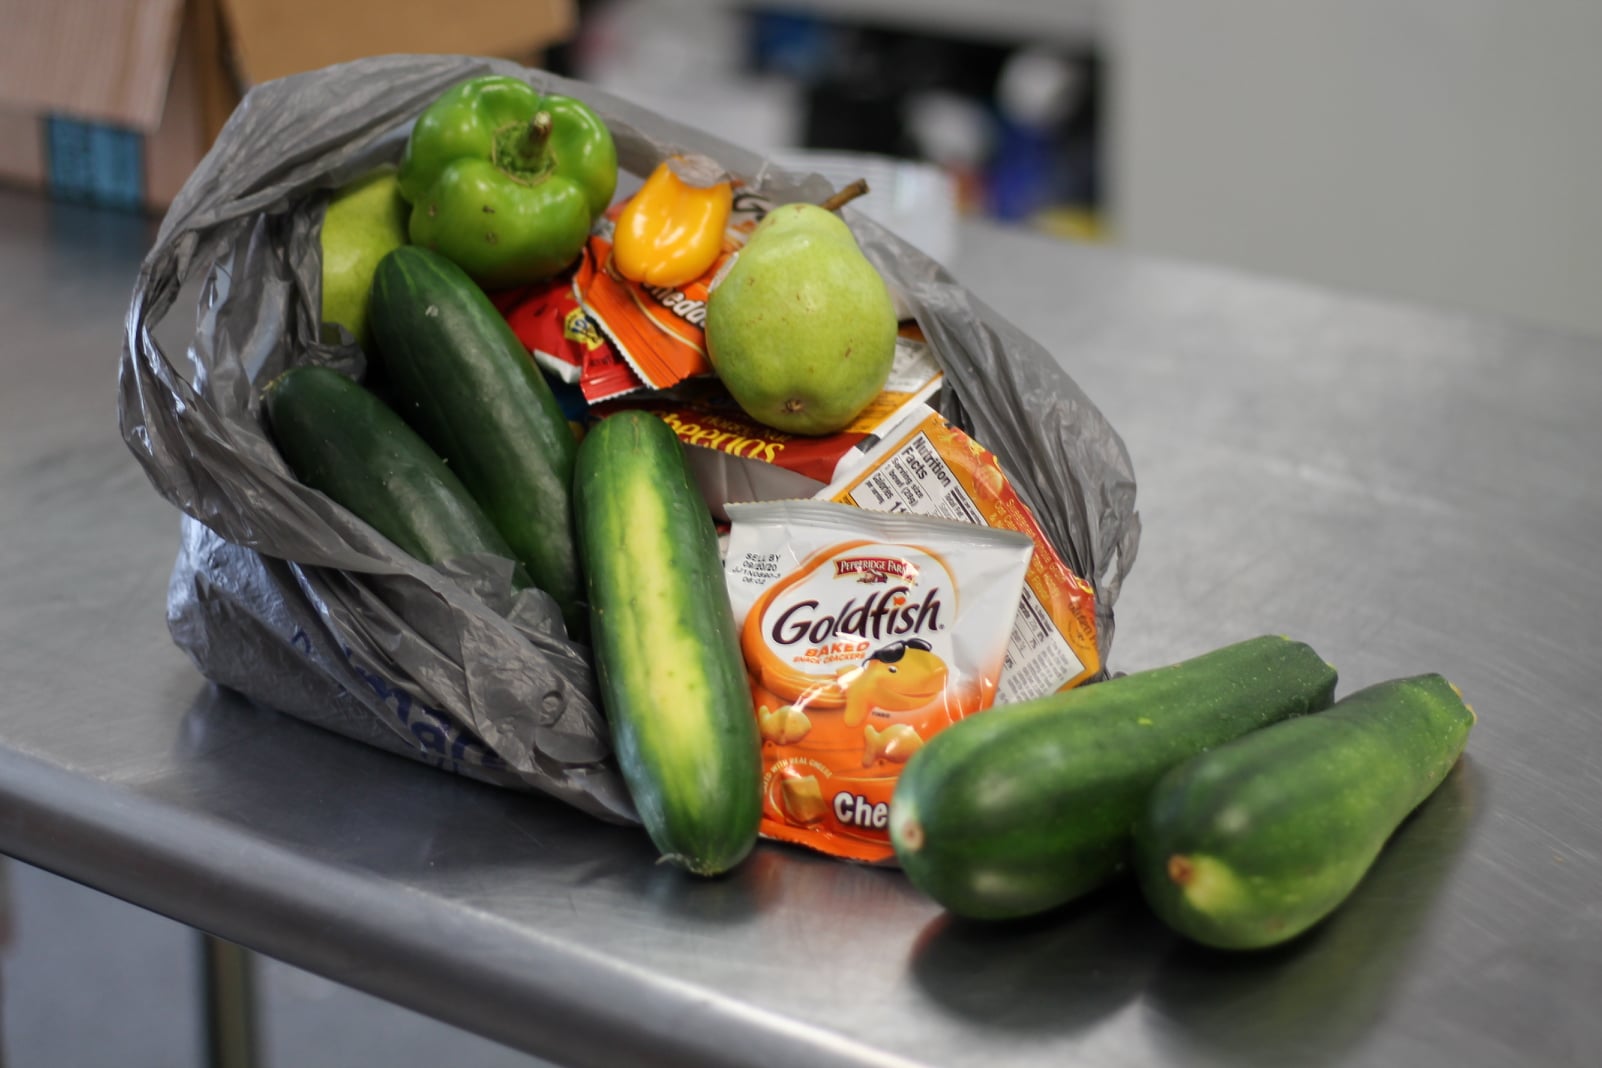 Bag of food with packaged snacks and fresh produce